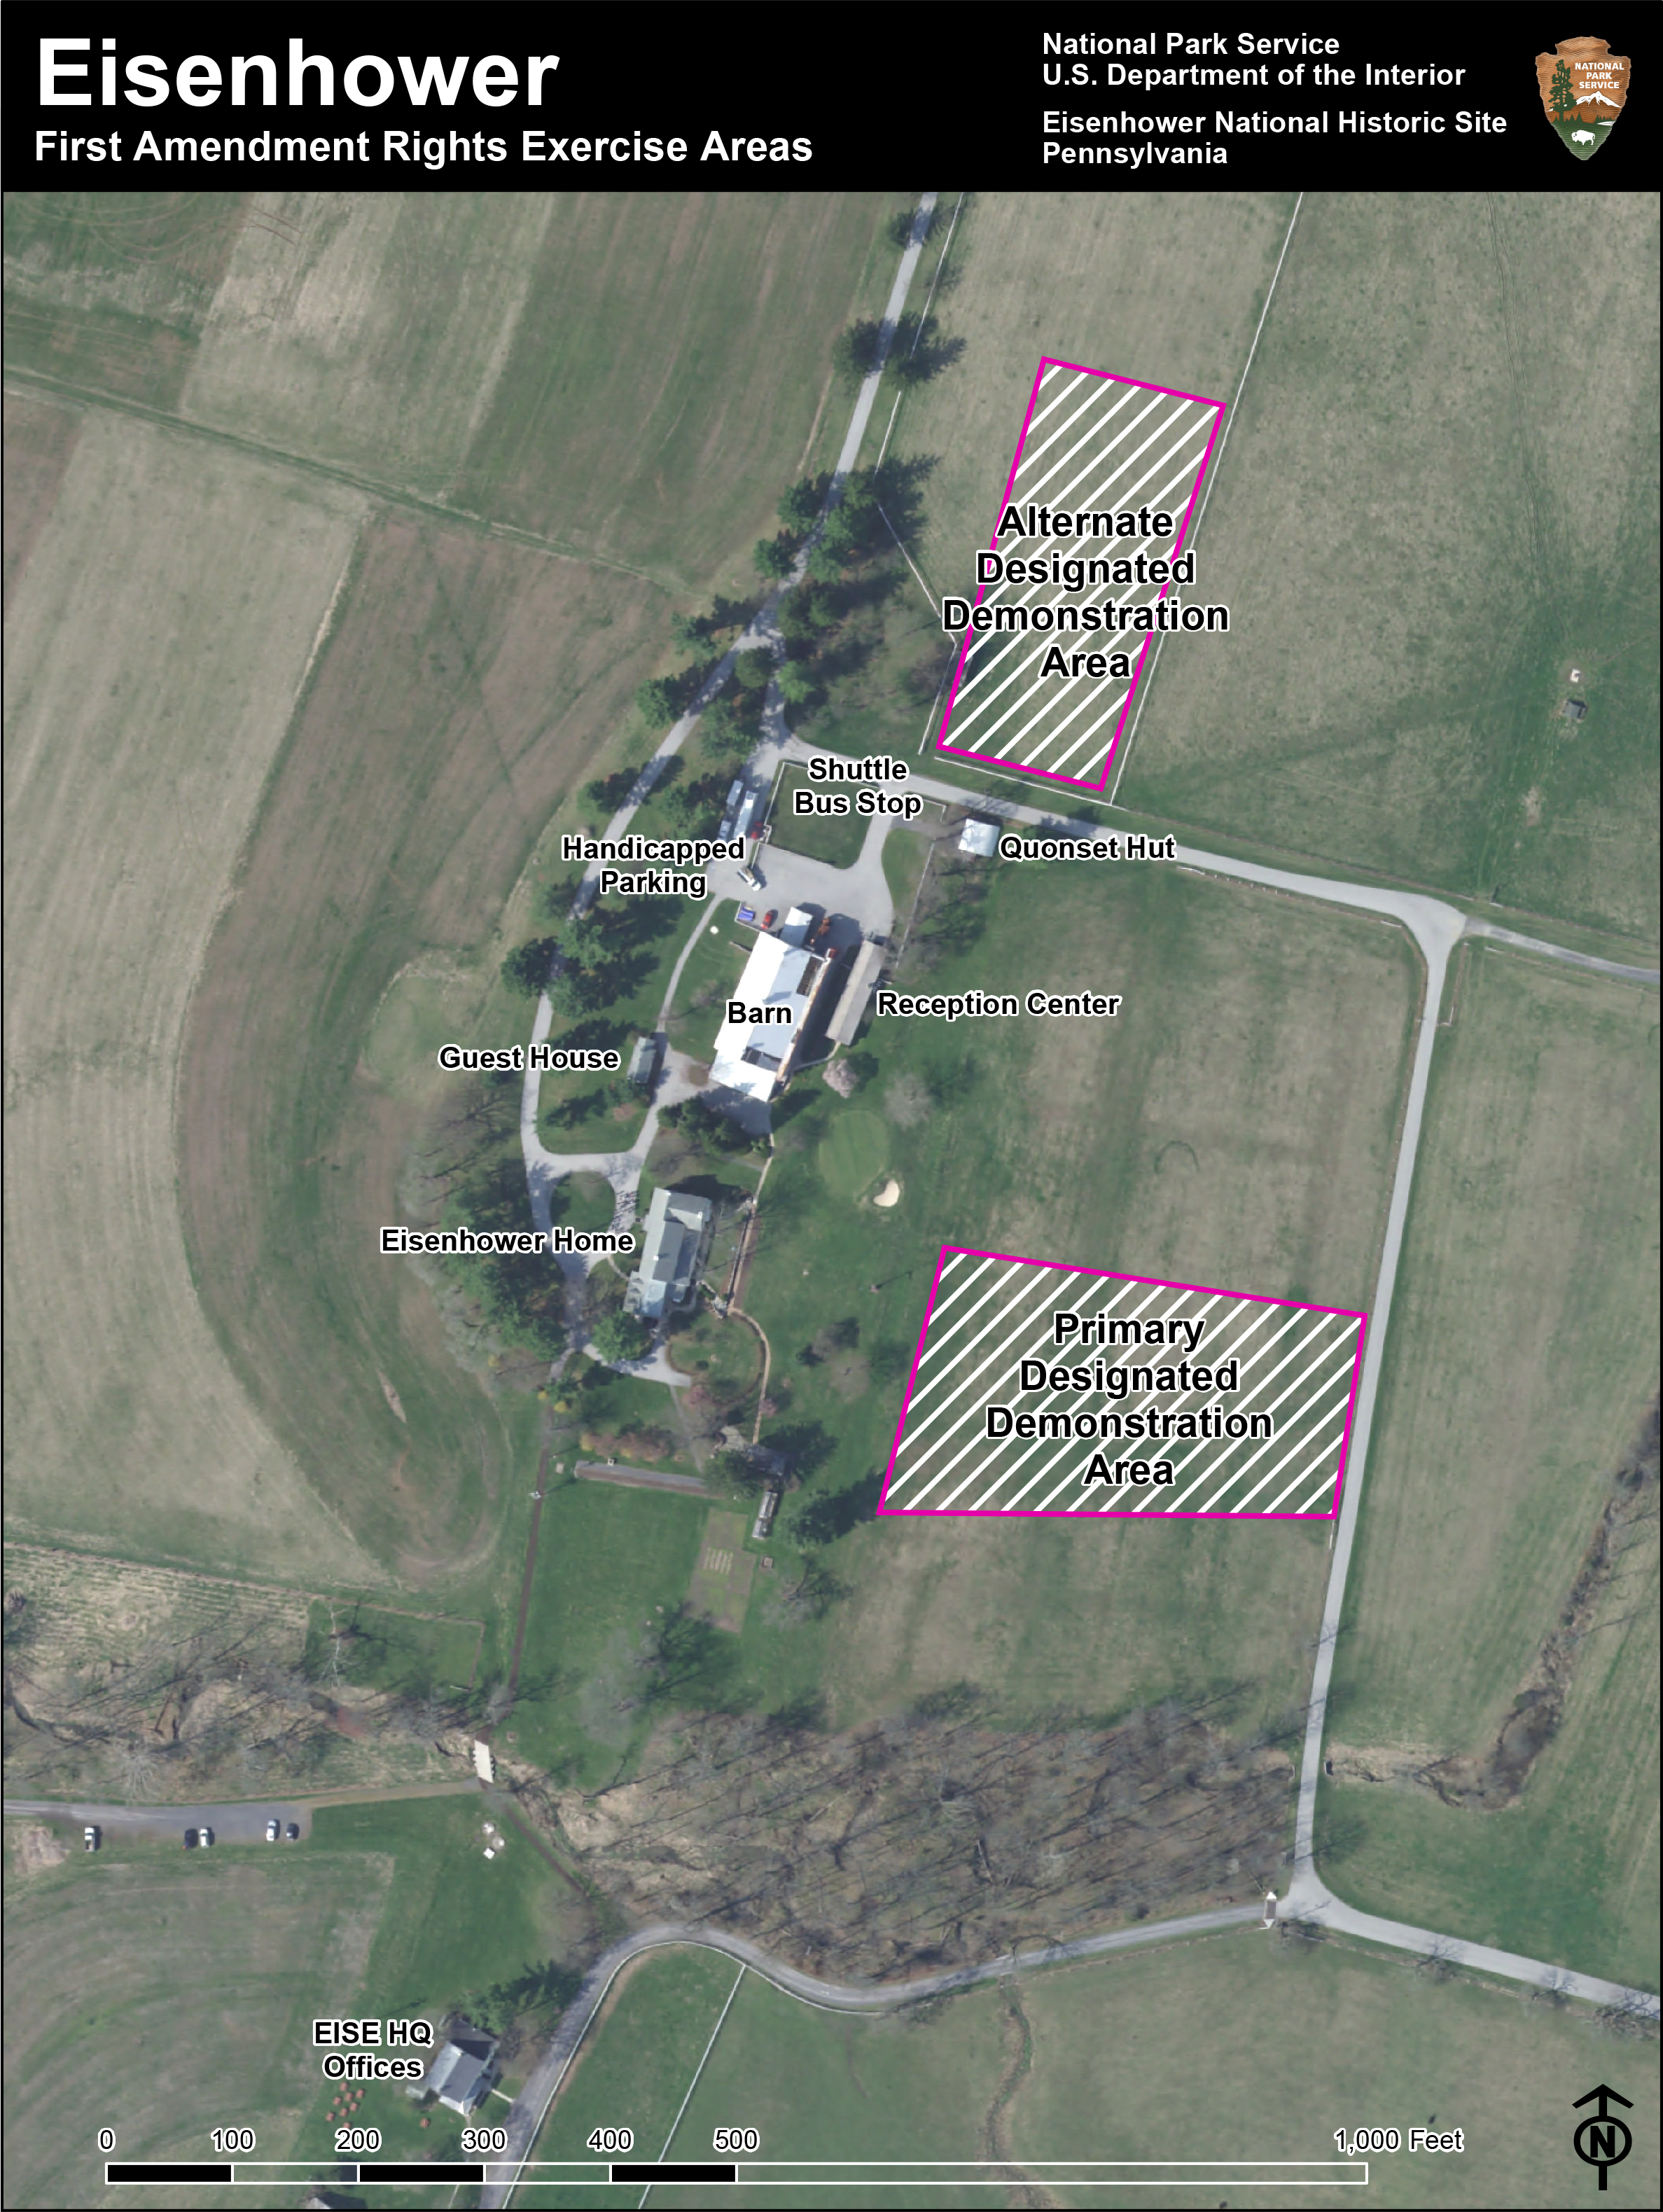 An overhead map of the Eisenhower National Historic Site. A house and barn are in the middle of various fields, paths, and roadways along with two pink and white striped boxes showing First Amendment demonstation areas.